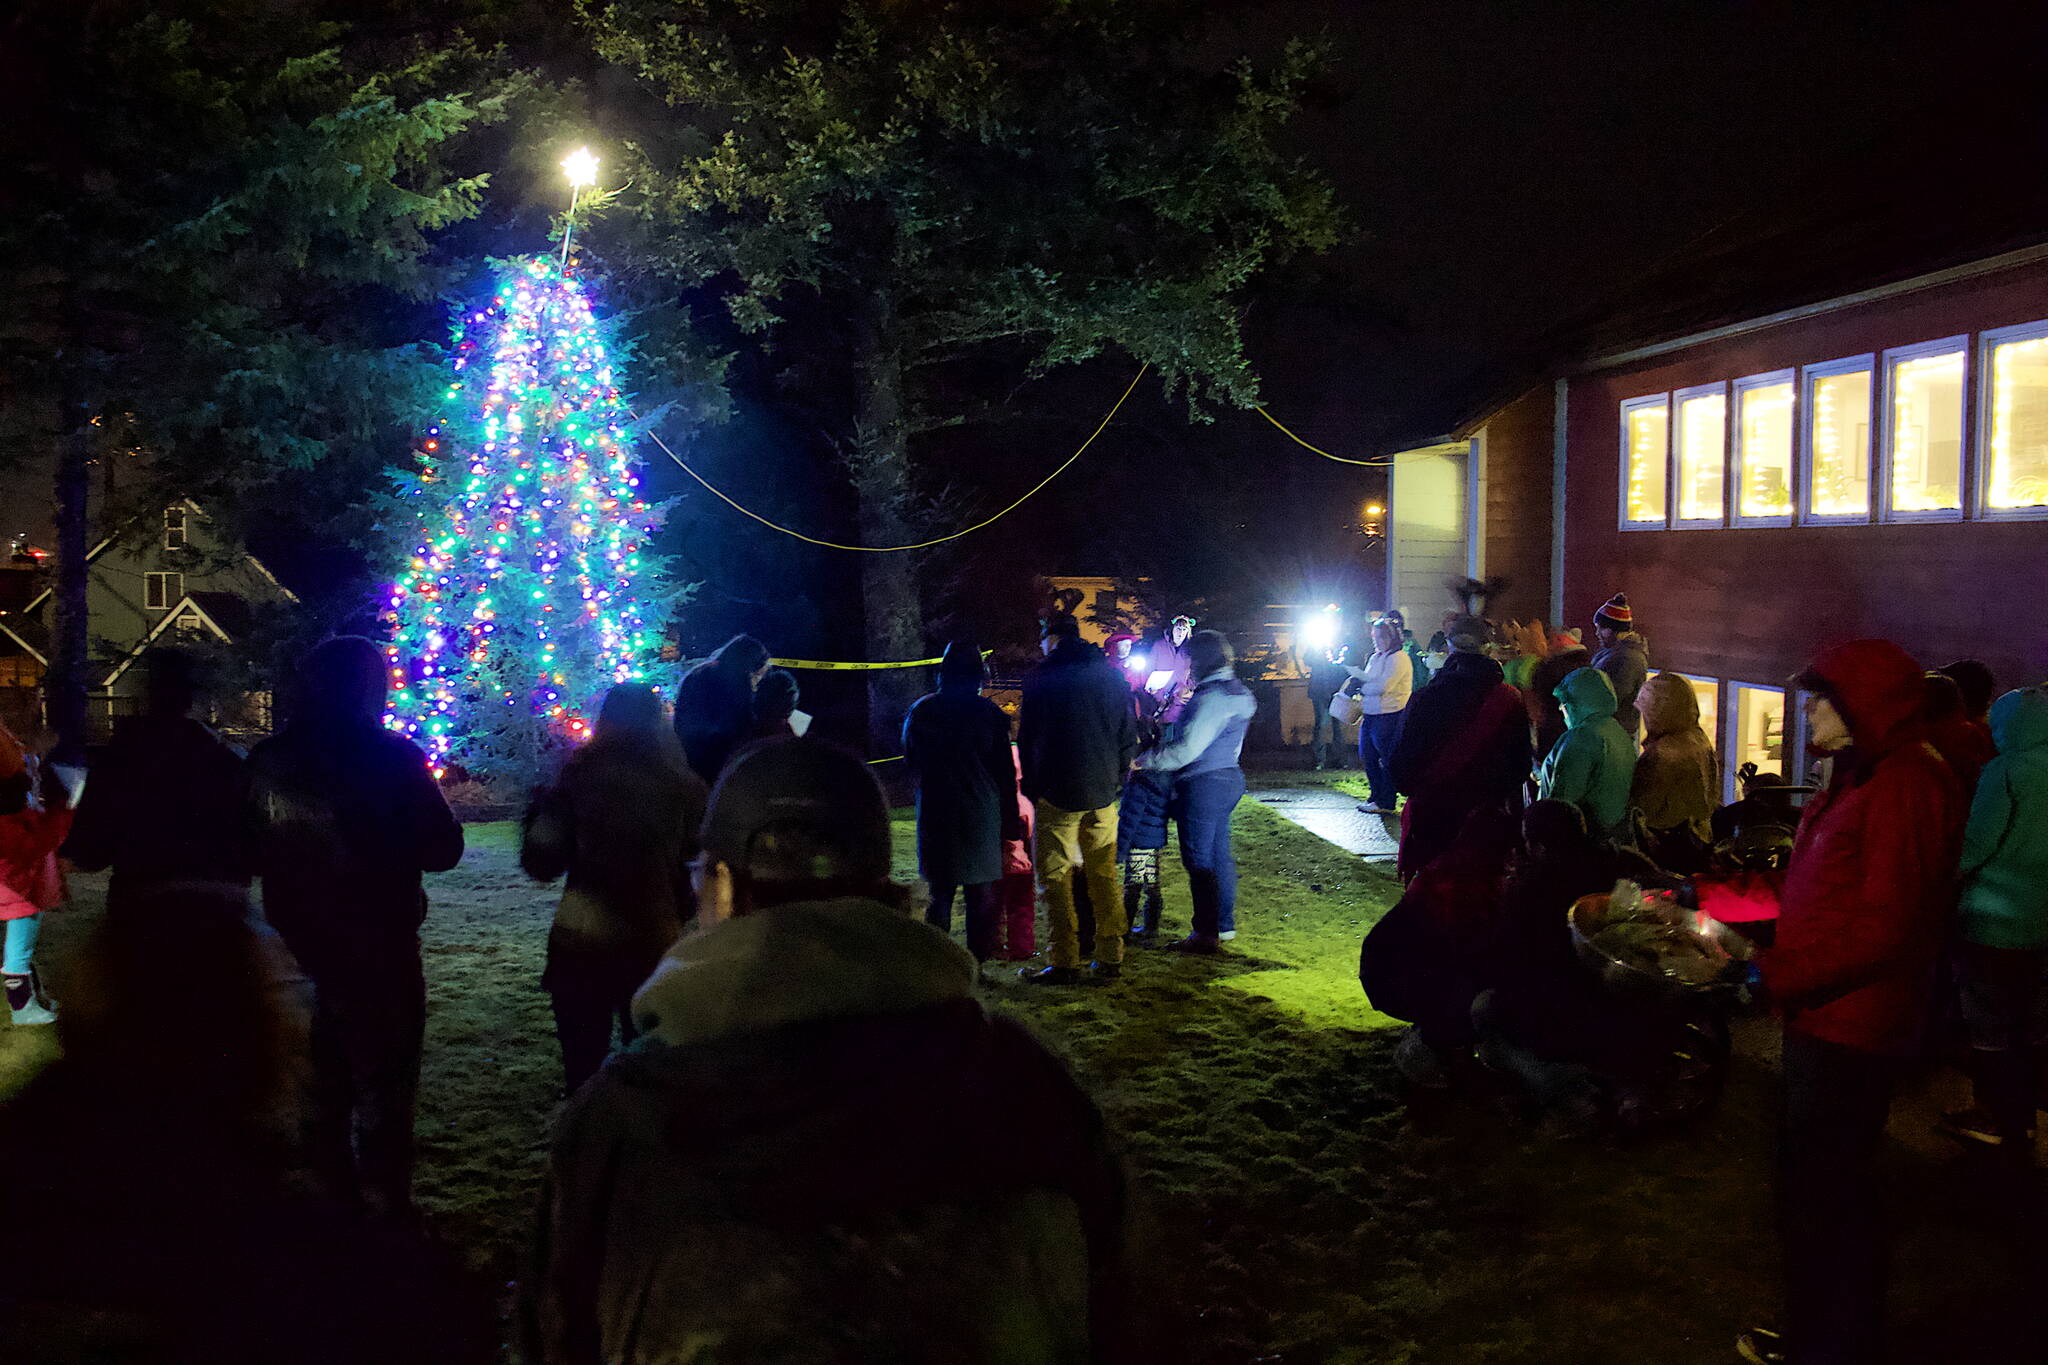 About 50 people watch the lighting of the Christmas tree outside Douglas Community United Methodist Church on Friday night. (Mark Sabbatini / Juneau Empire)